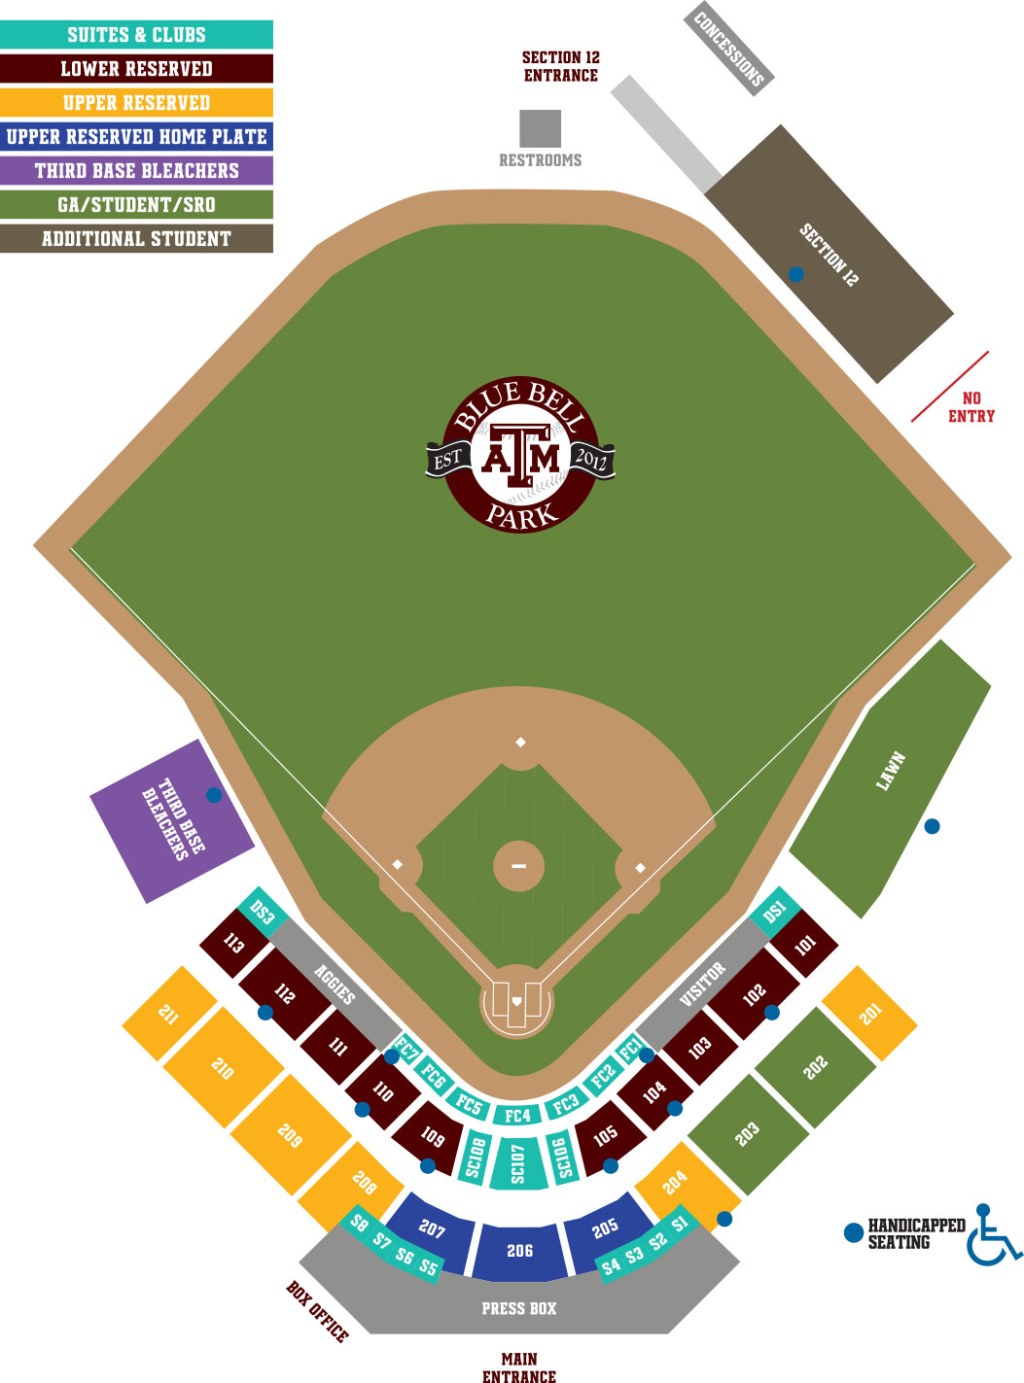 blue bell park seating map - Blue Bell Park Gameday Central - Texas A&M Athletics - thMan